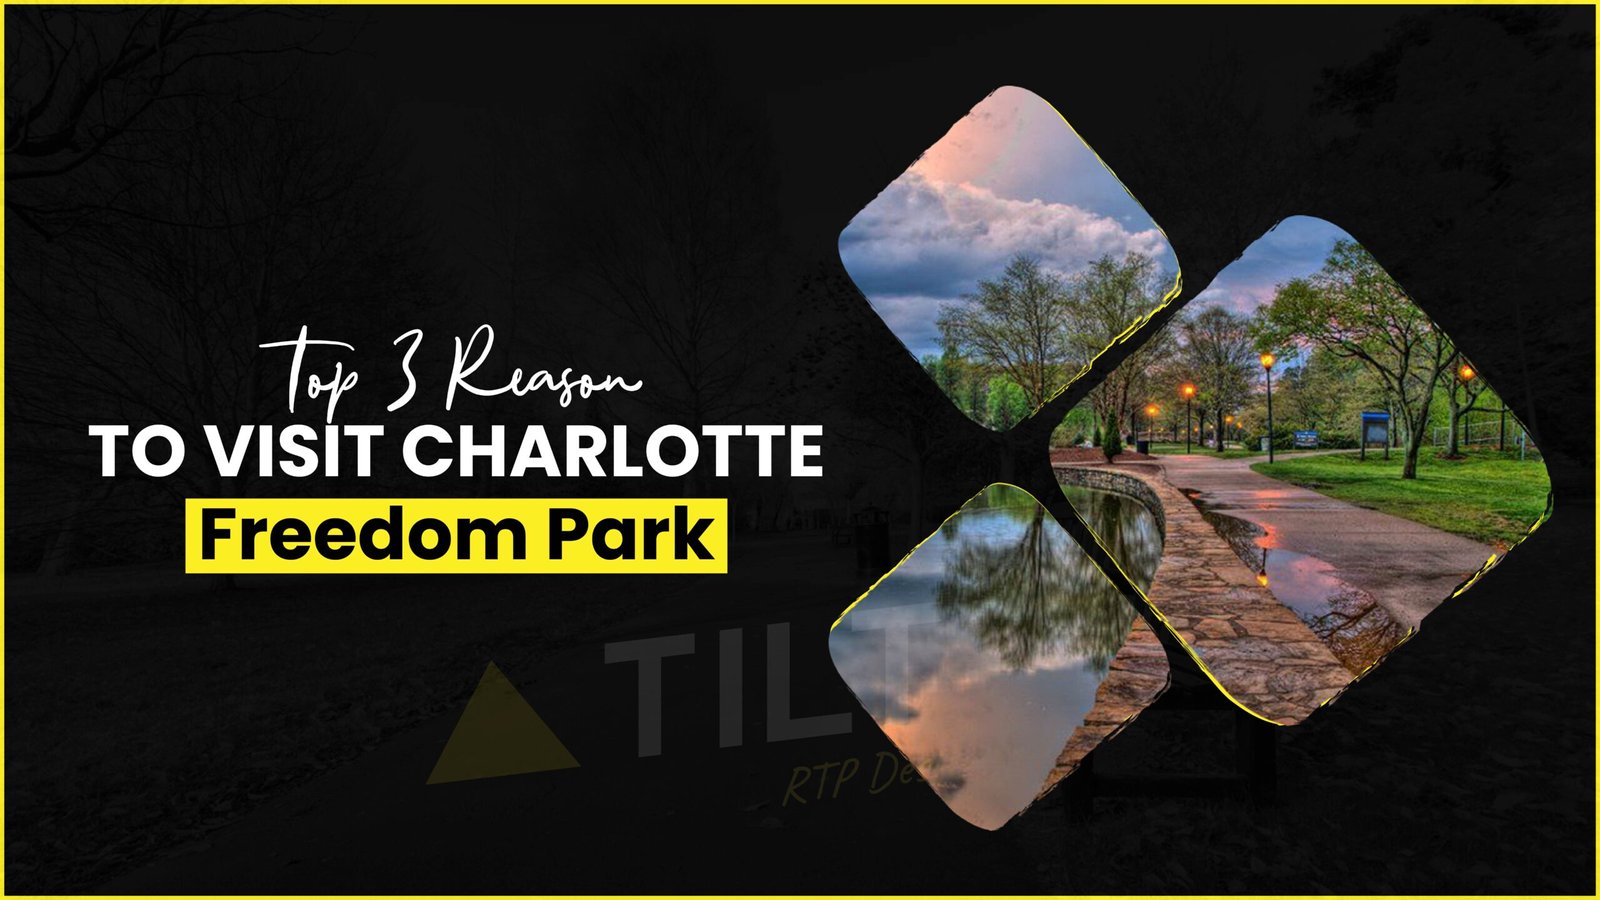 Top 3 Reasons to Visit Charlotte Freedom Park - Triangle Tilt